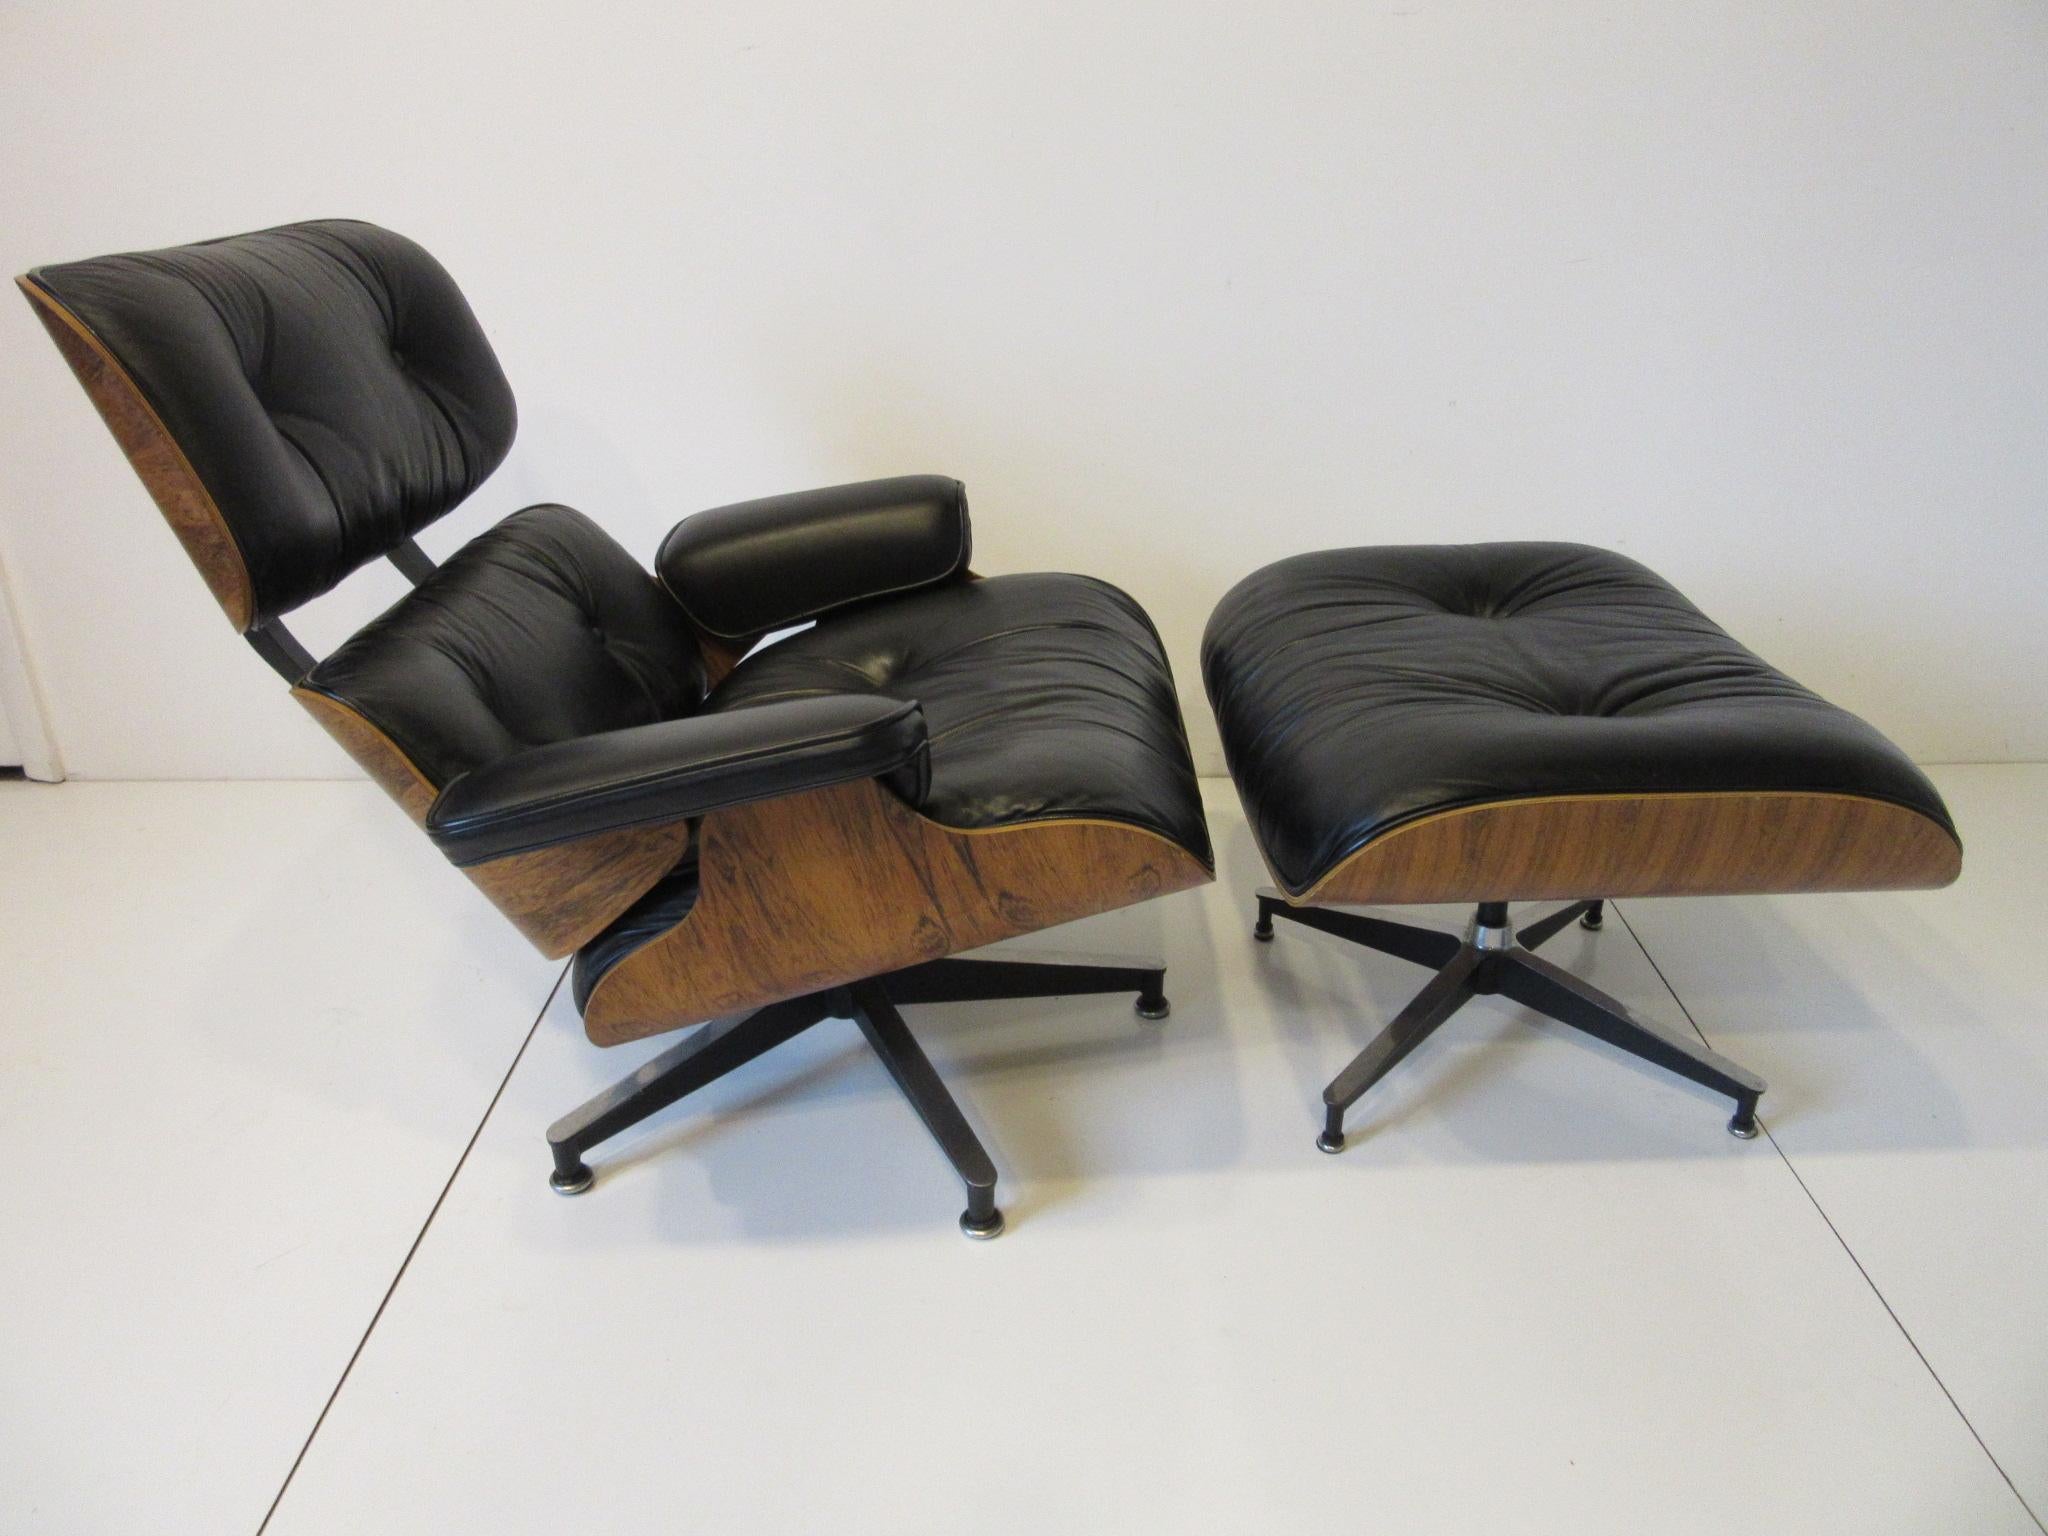 A soft black leather cushioned 670 lounge chair and 671 ottomans with well flamed, rich and rare Brazilian rosewood shell. Having cast aluminum star bases to both pieces and still retaining the manufactures labels from the Herman Miller furniture